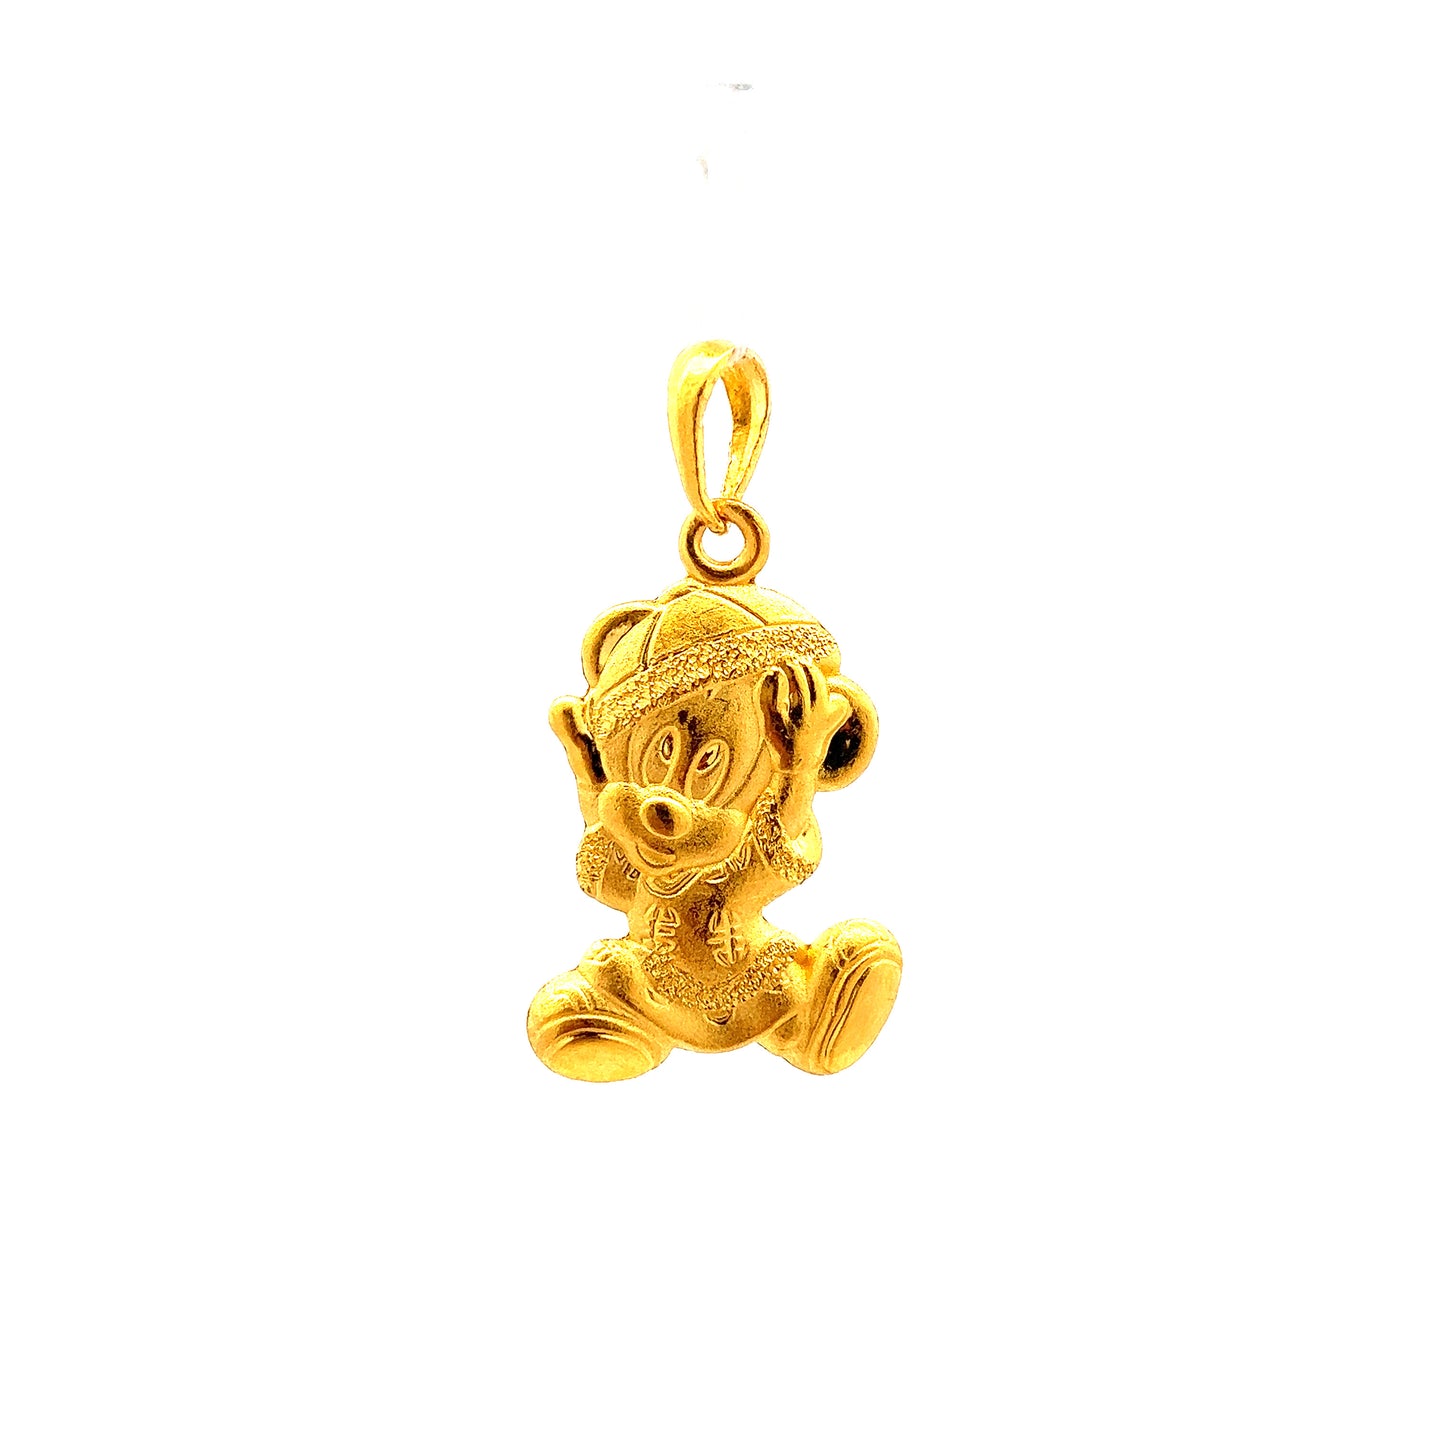 GOLD PENDANT ( 24K ) ( 4.2g ) - 0005028 Chain sold separately